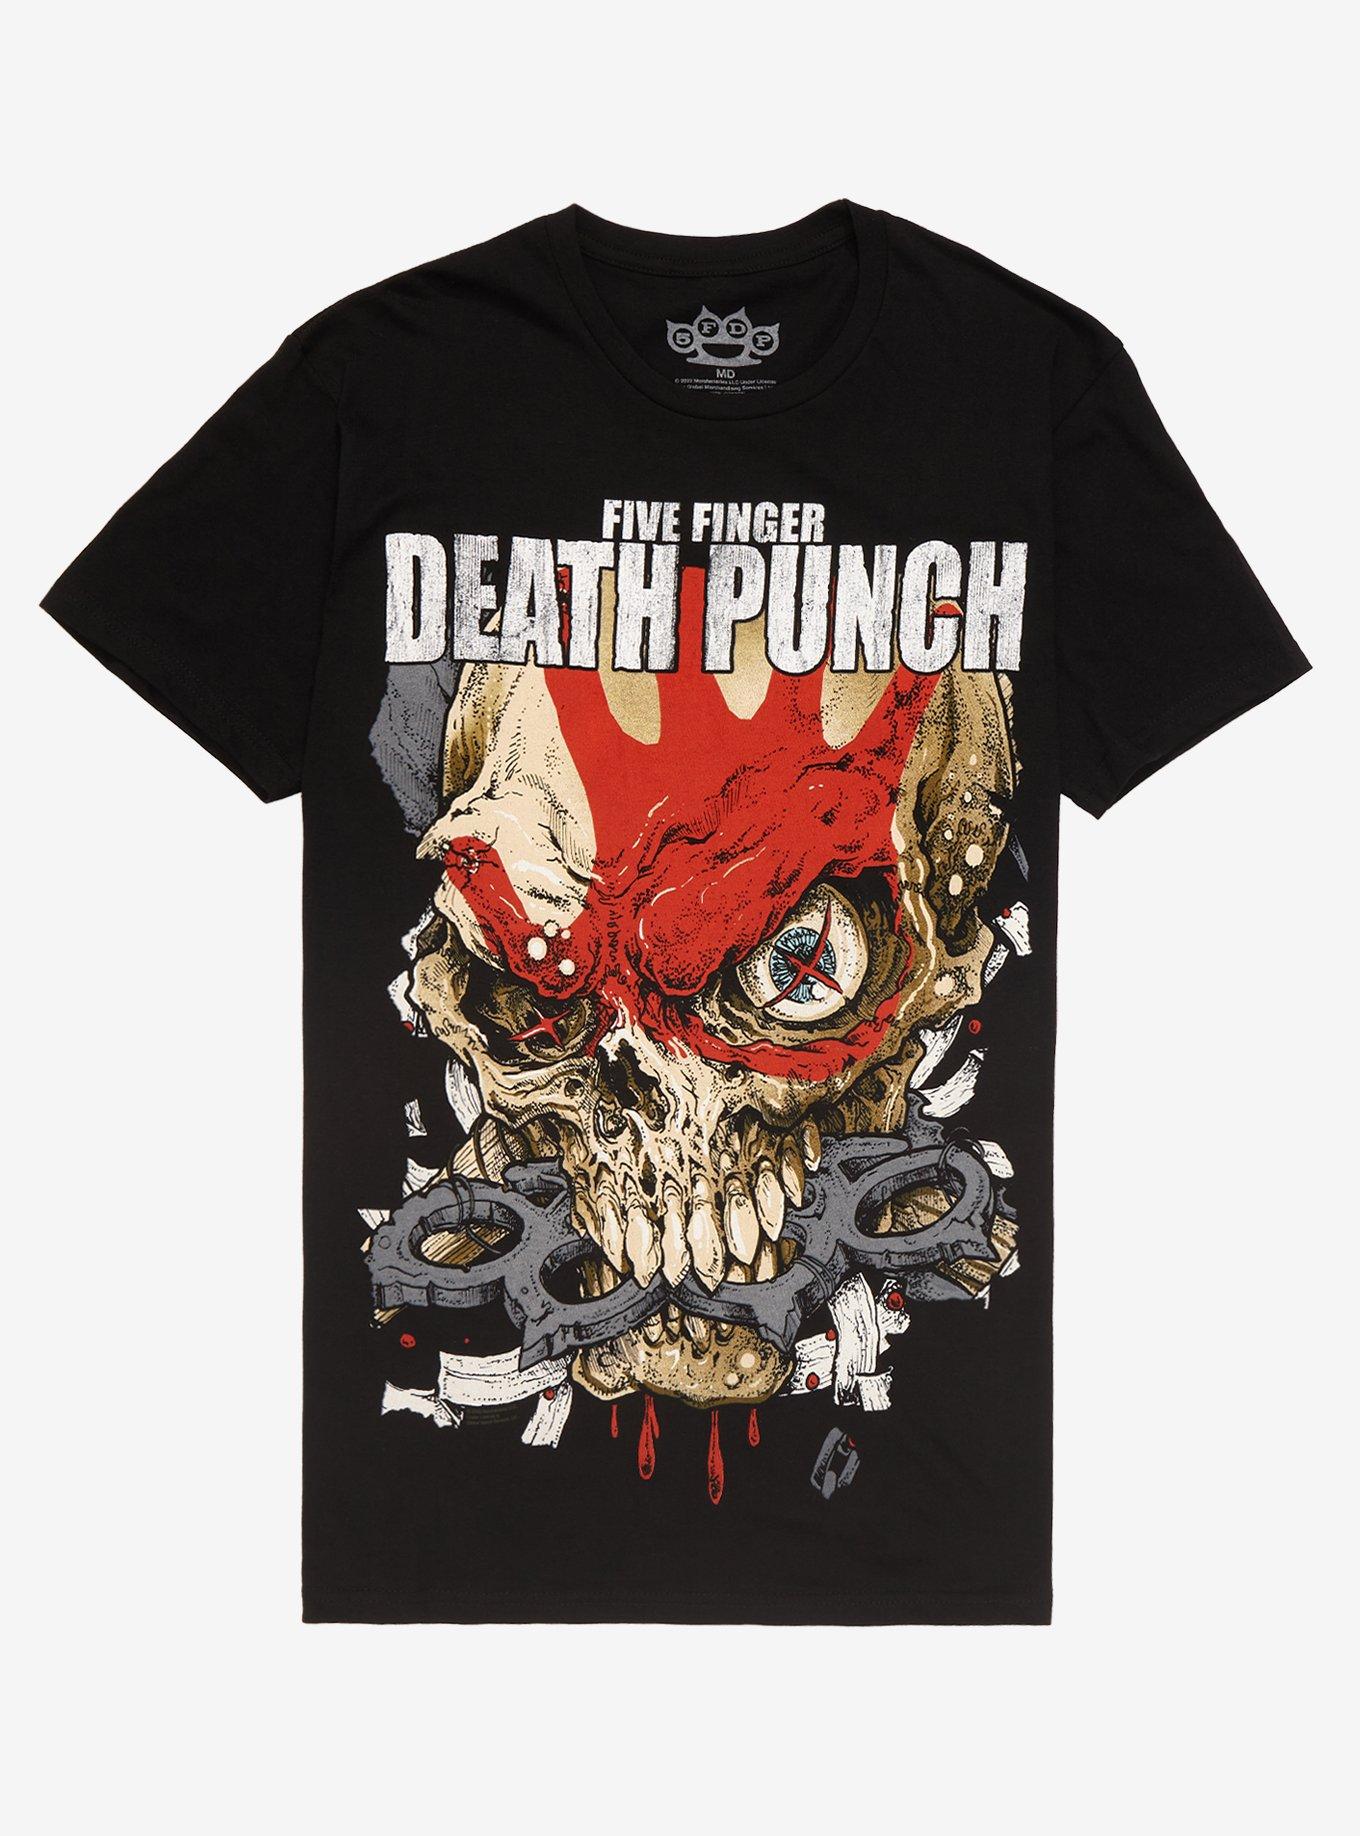 Finger Death Punch T-Shirt | Hot Topic